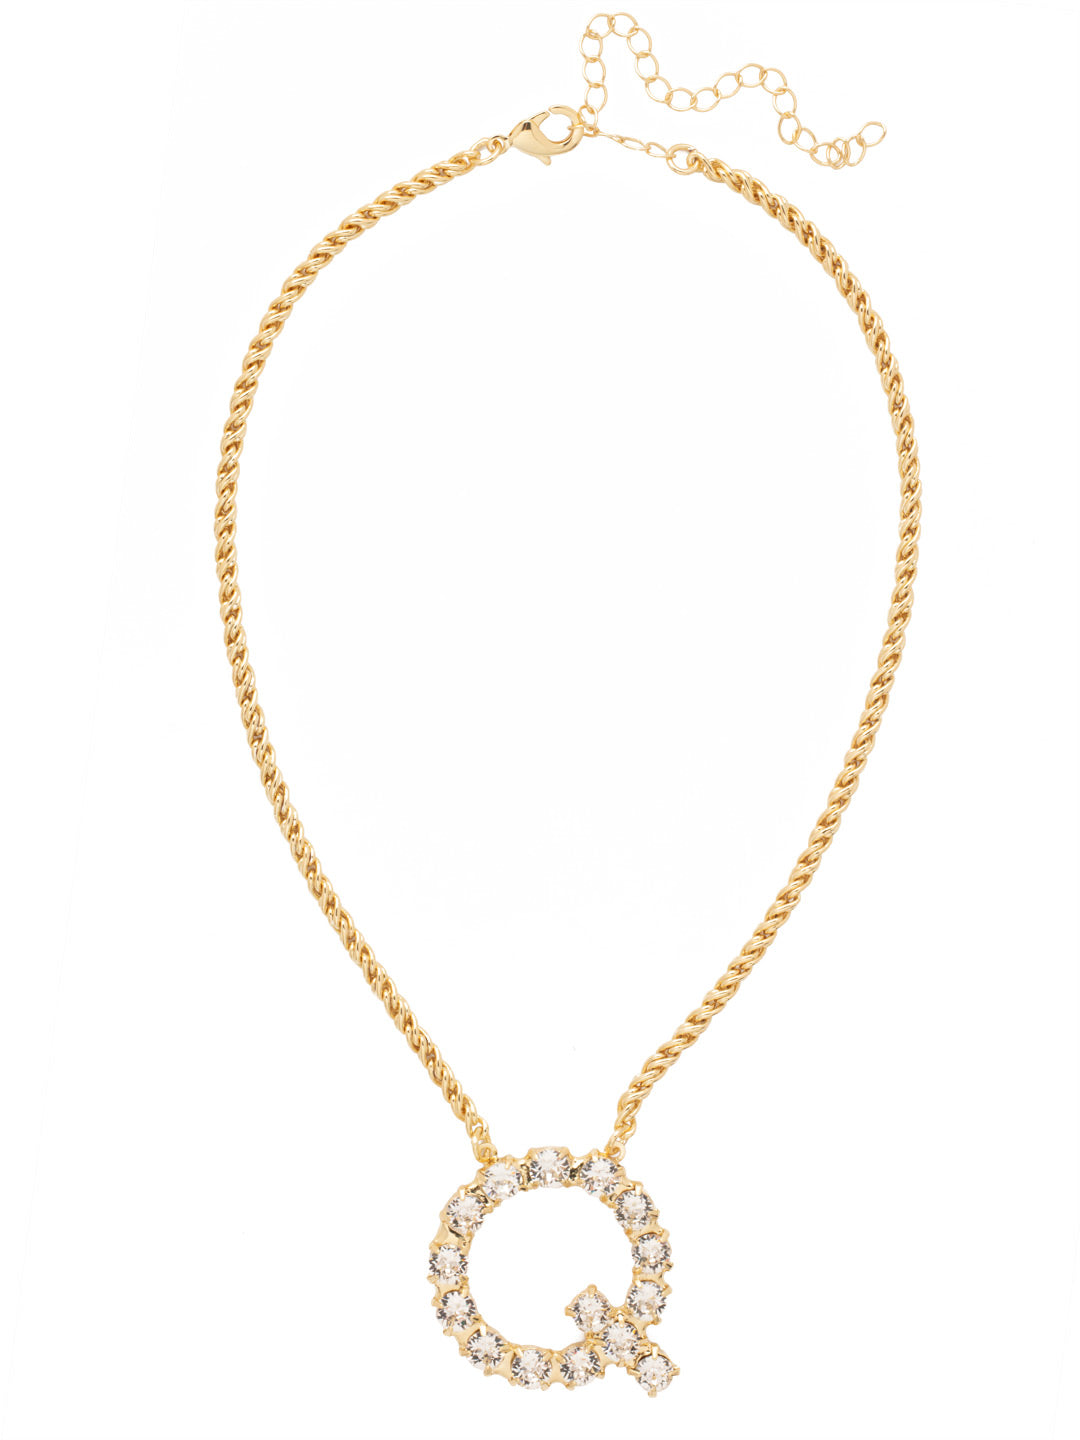 Q Initial Rope Pendant Necklace - NFK36BGCRY - <p>The Initial Rope Pendant Necklace features a crystal encrusted metal monogram pendant on an adjustable rope chain, secured with a lobster claw clasp. From Sorrelli's Crystal collection in our Bright Gold-tone finish.</p>